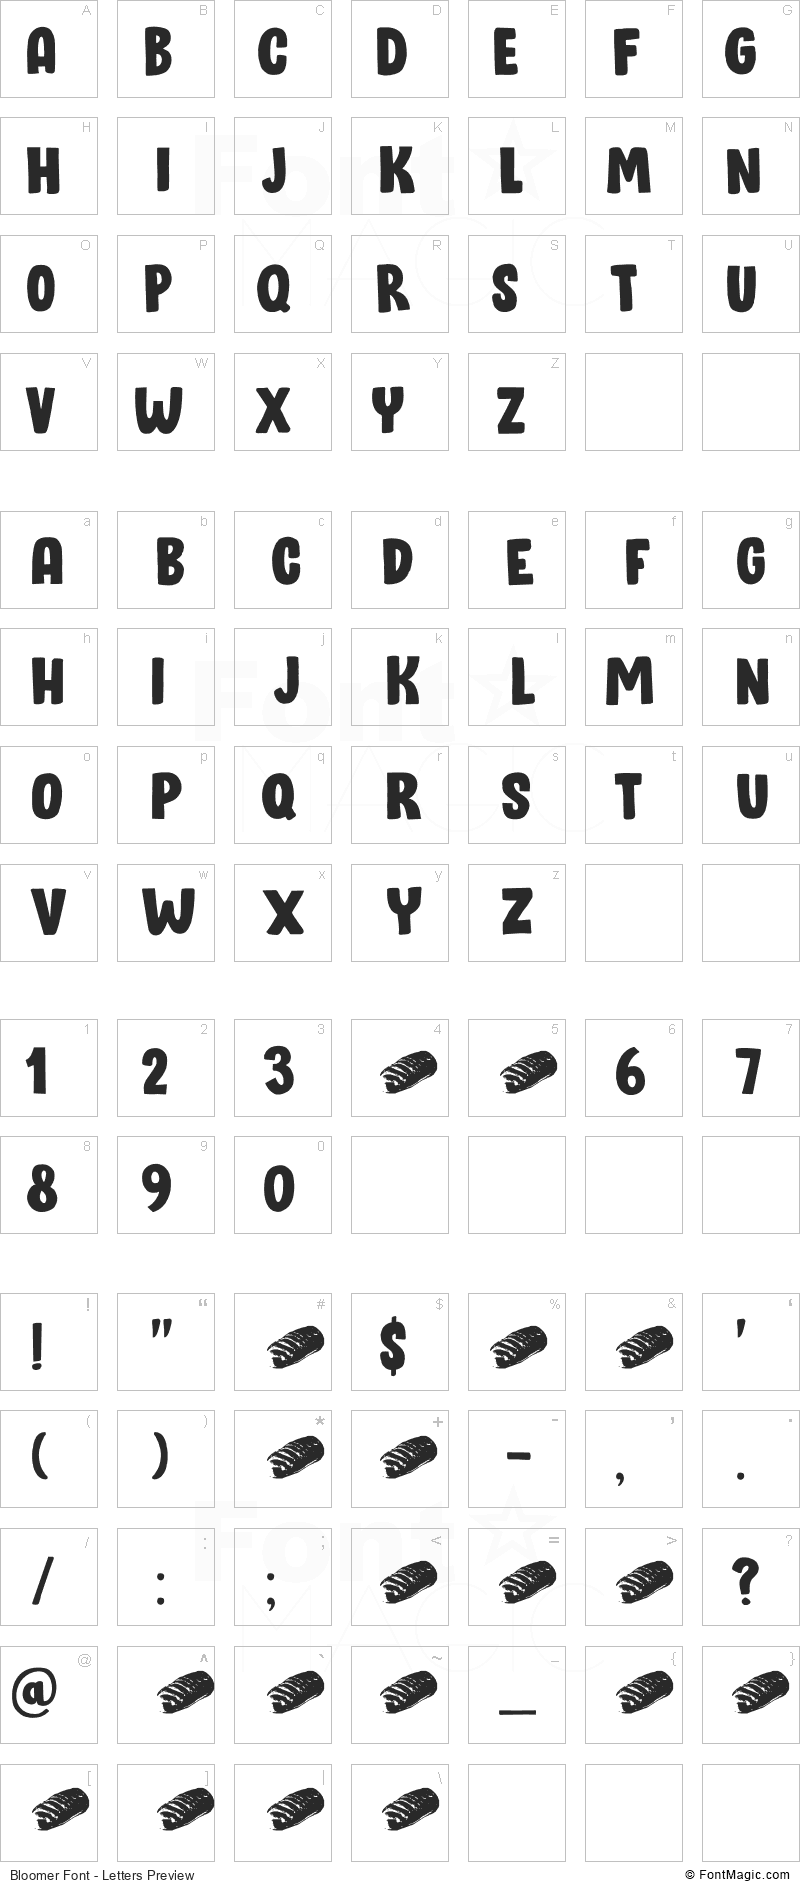 Bloomer Font - All Latters Preview Chart